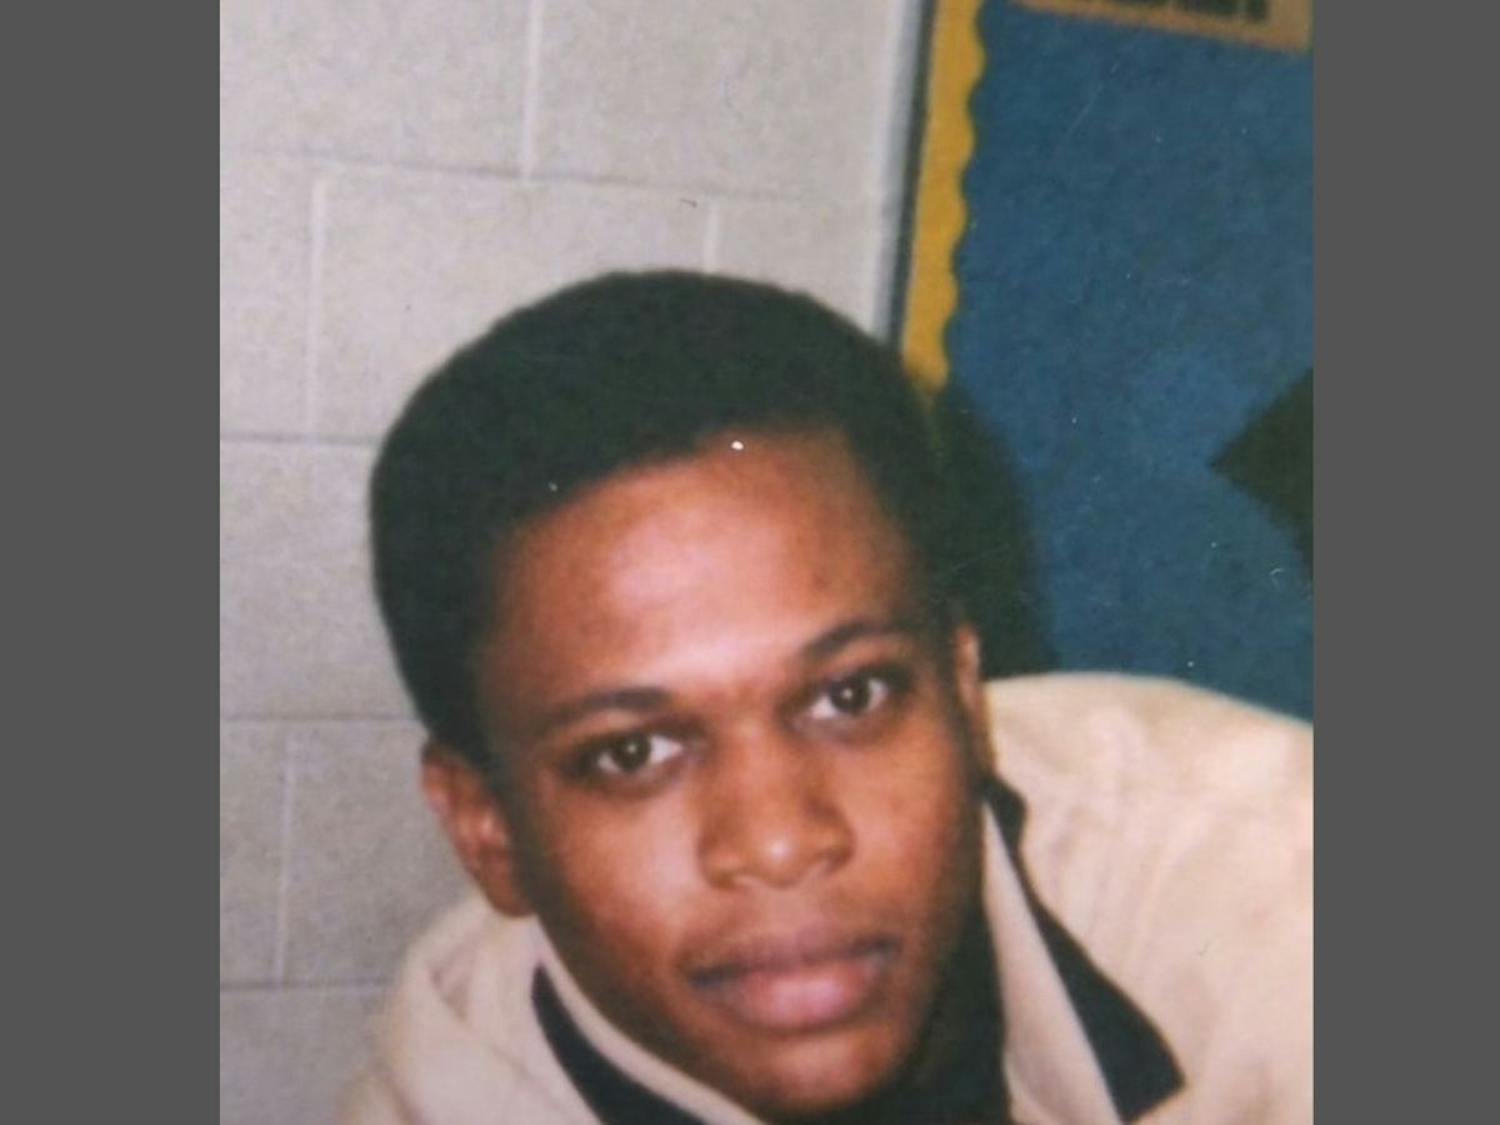 Aaron Lorenzo Dorsey was shot and killed by a DUPD officer on March 13, 2010.